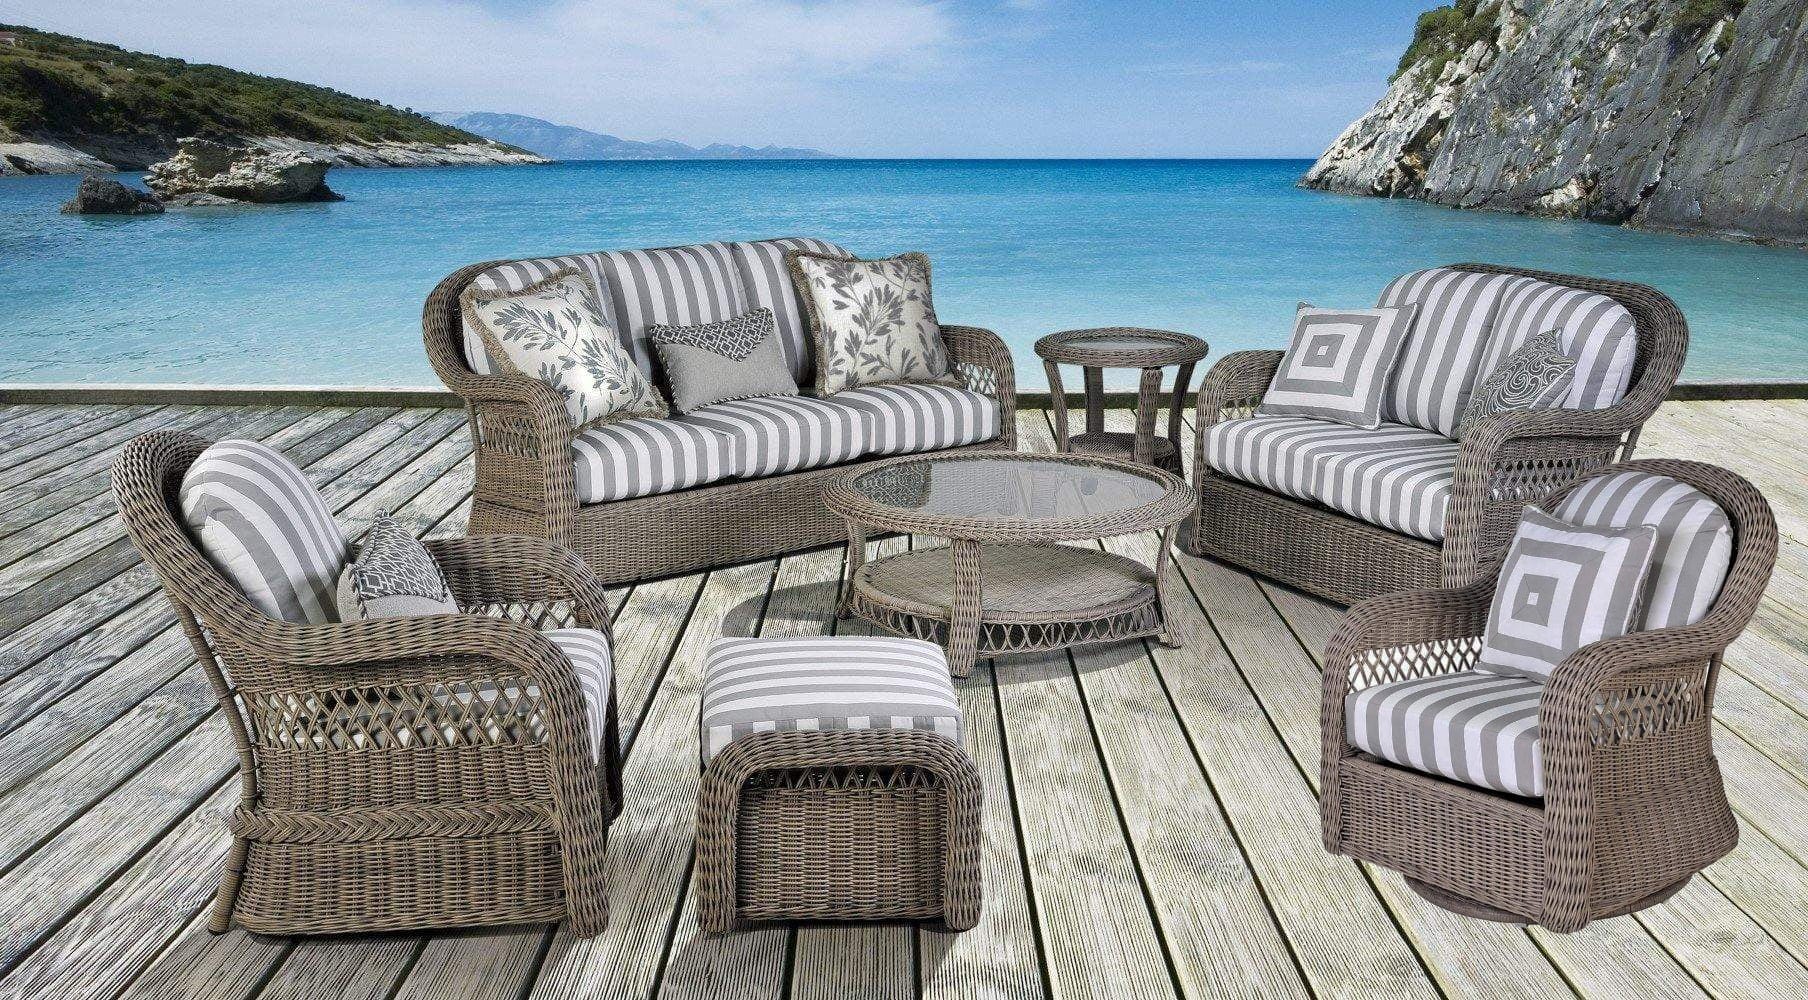 South Sea Outdoor Living Patio Furniture Arcadia Seating 6 Pc Patio Furniture Set by South Sea Outdoor Living - 77300